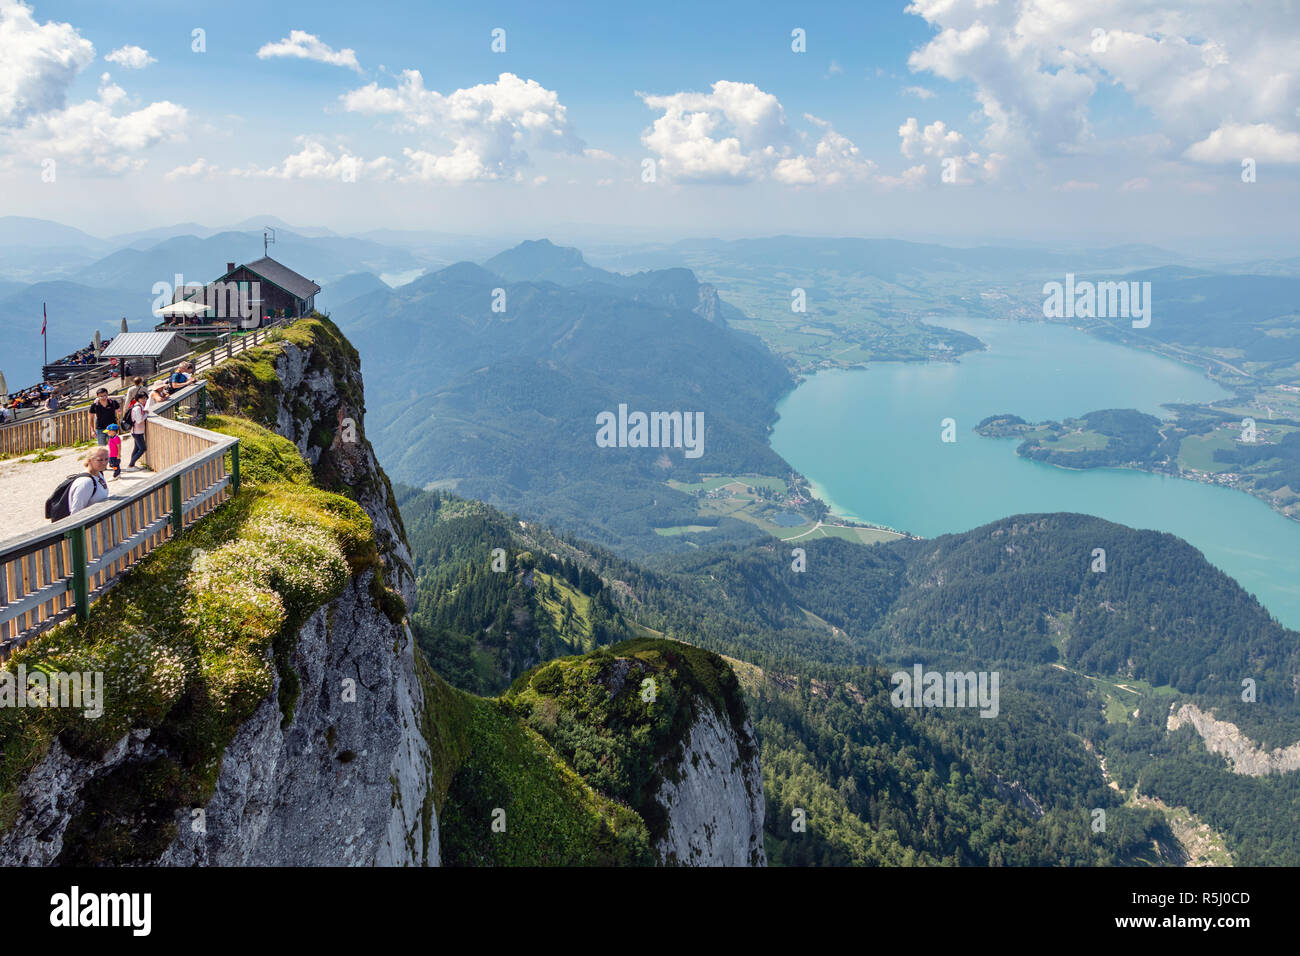 View of Mondsee from the summit of the Schafberg Mountain, St Wolfgang im Salzkammergut, Austria Stock Photo